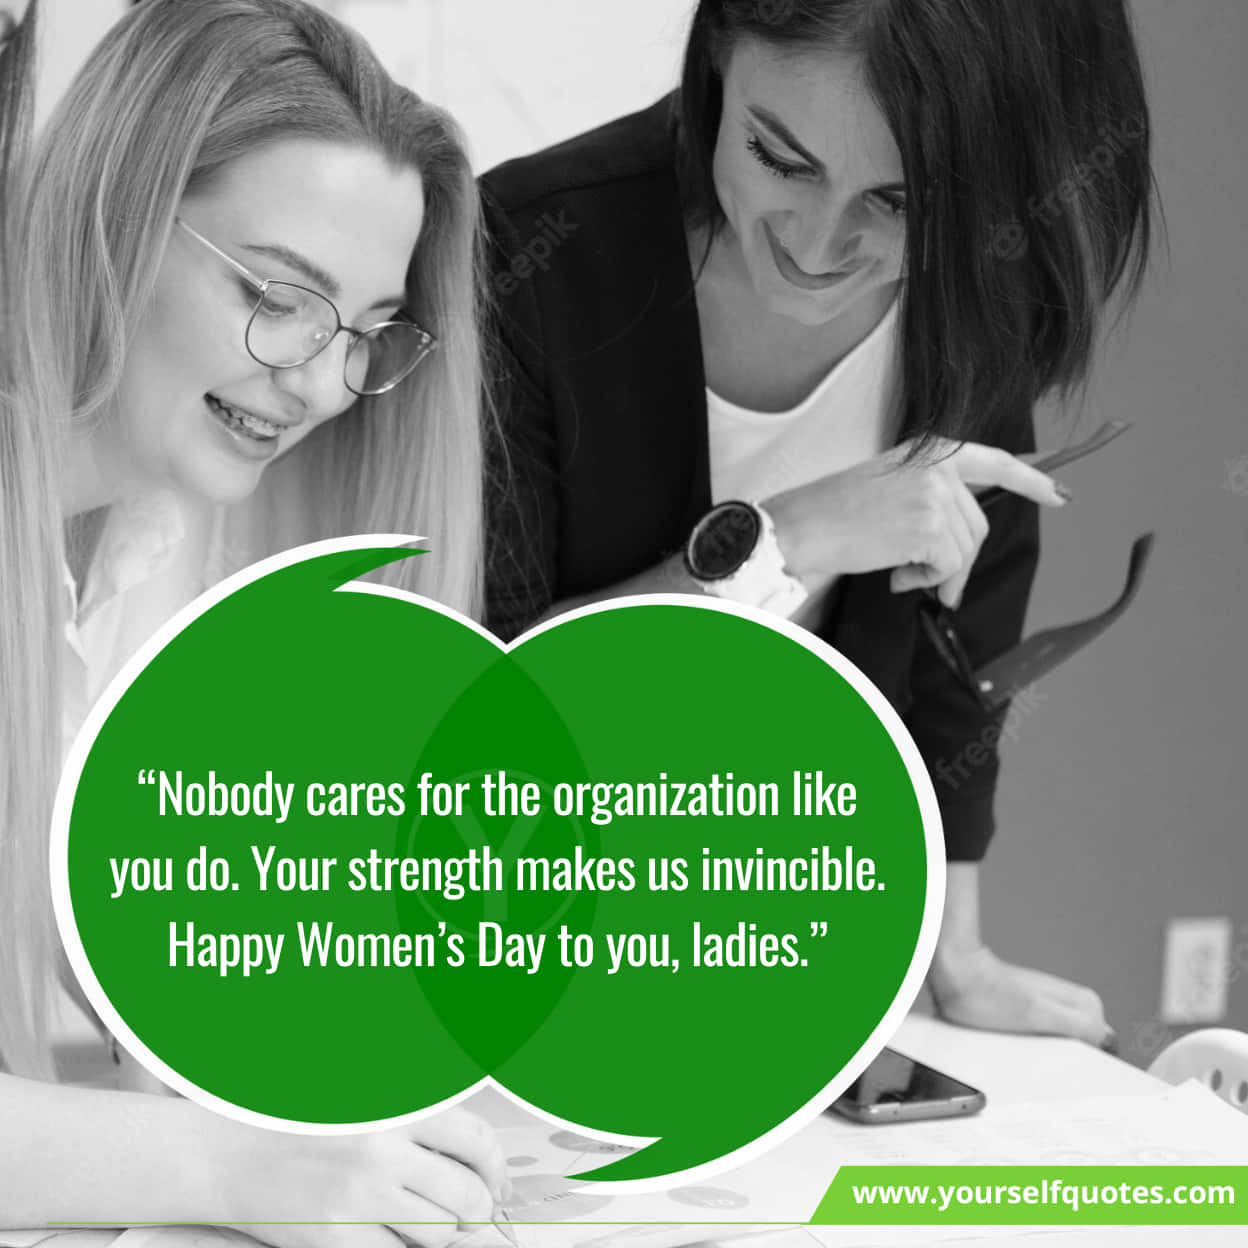 Heart-Warming Women's Day Wishes About Employees